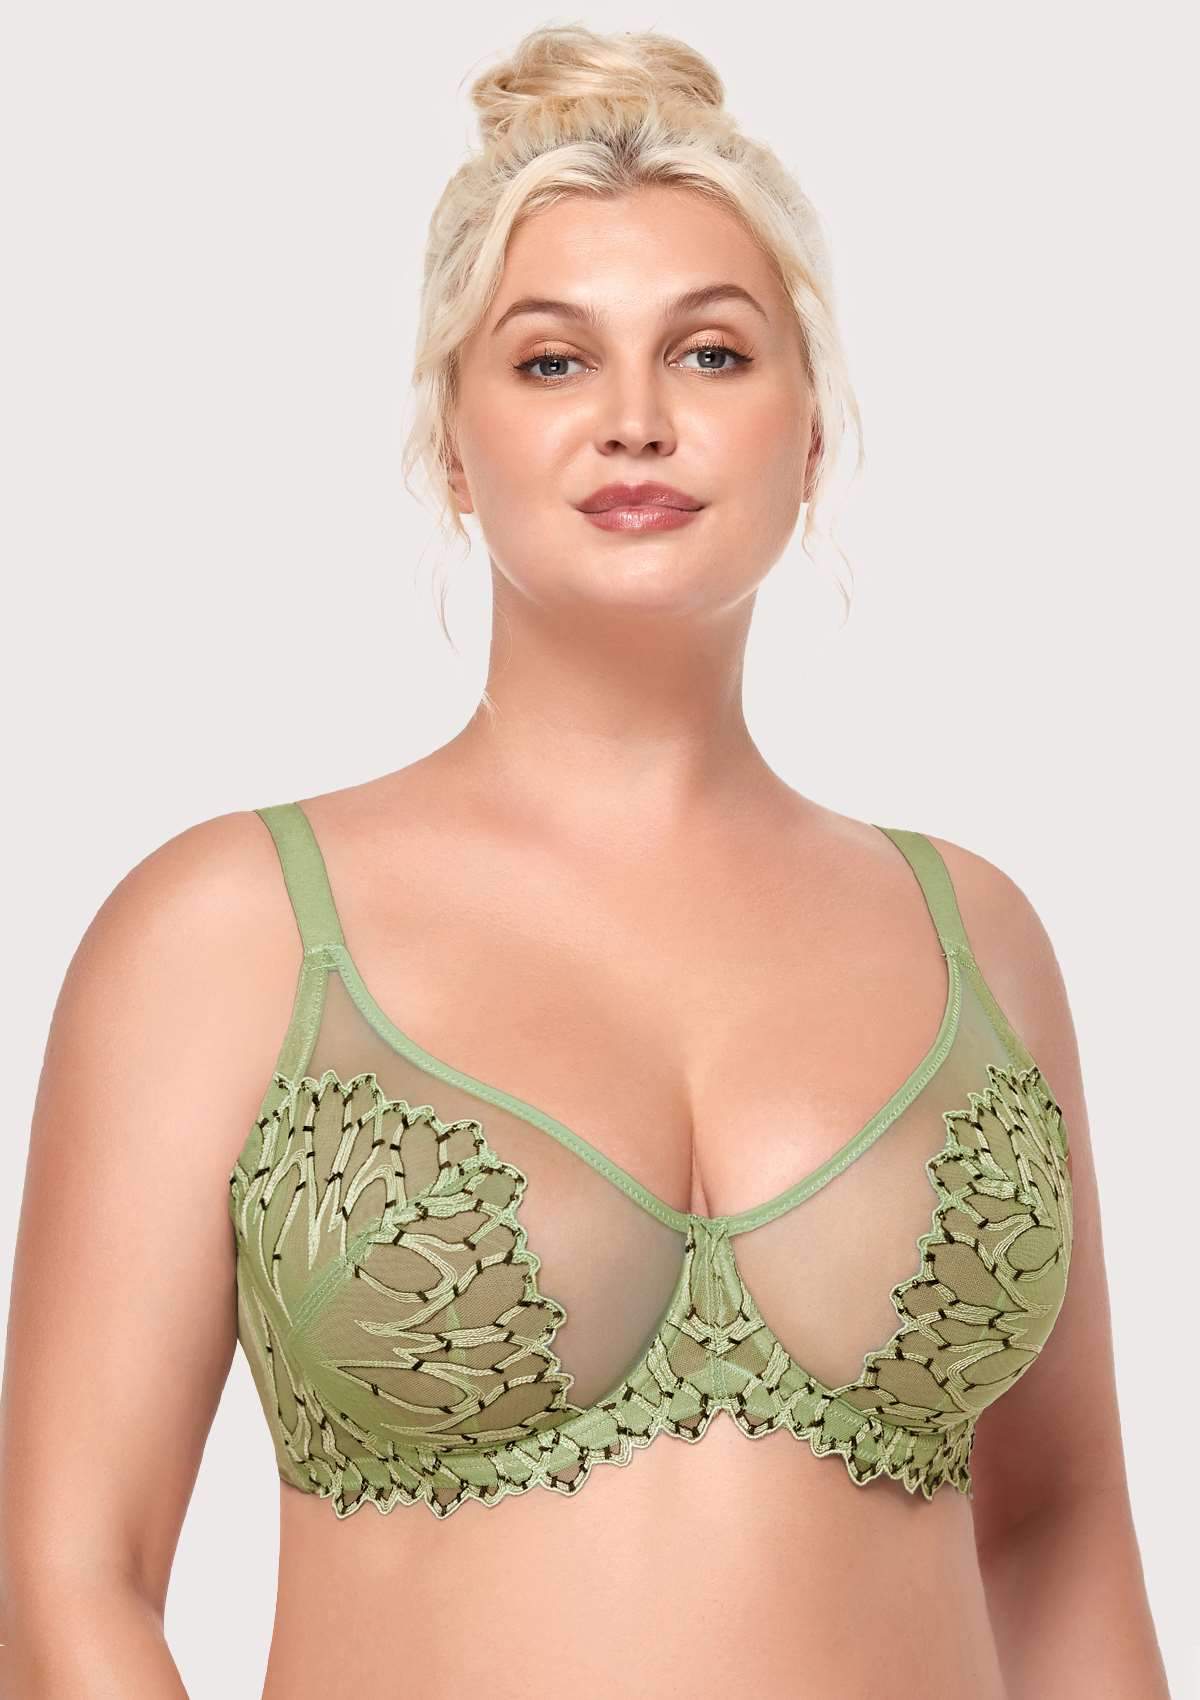 HSIA Chrysanthemum Floral Embroidered Bra: Lace Sheer Unpadded Bra - Green / 34 / DD/E